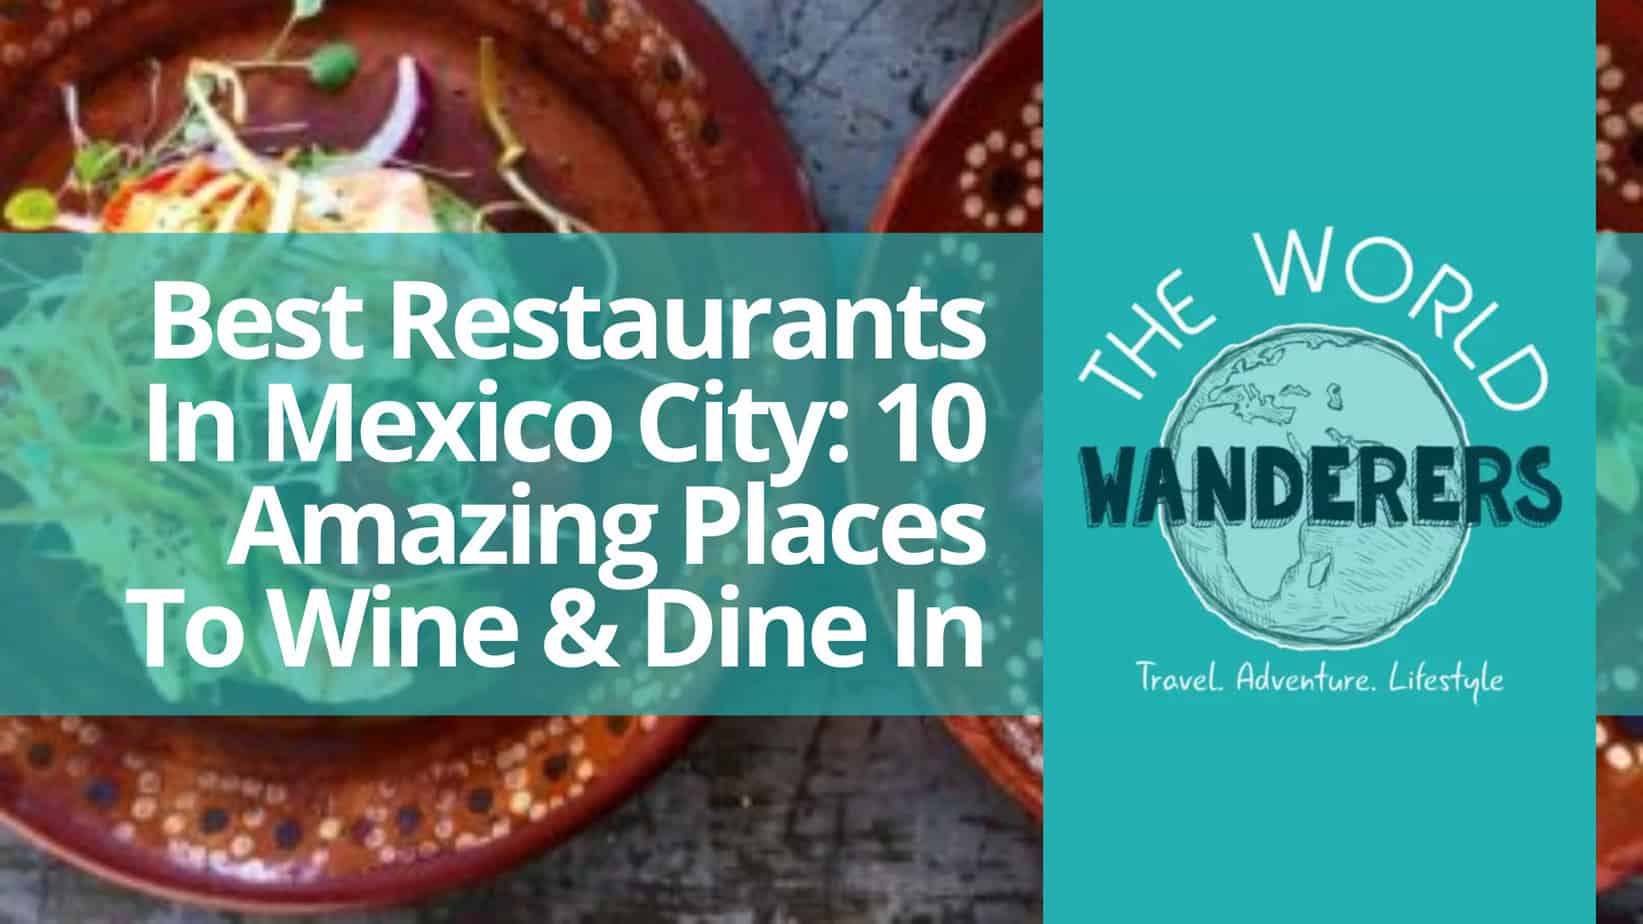 Best Restaurants In Mexico City 10 Amazing Places To Wine & Dine In